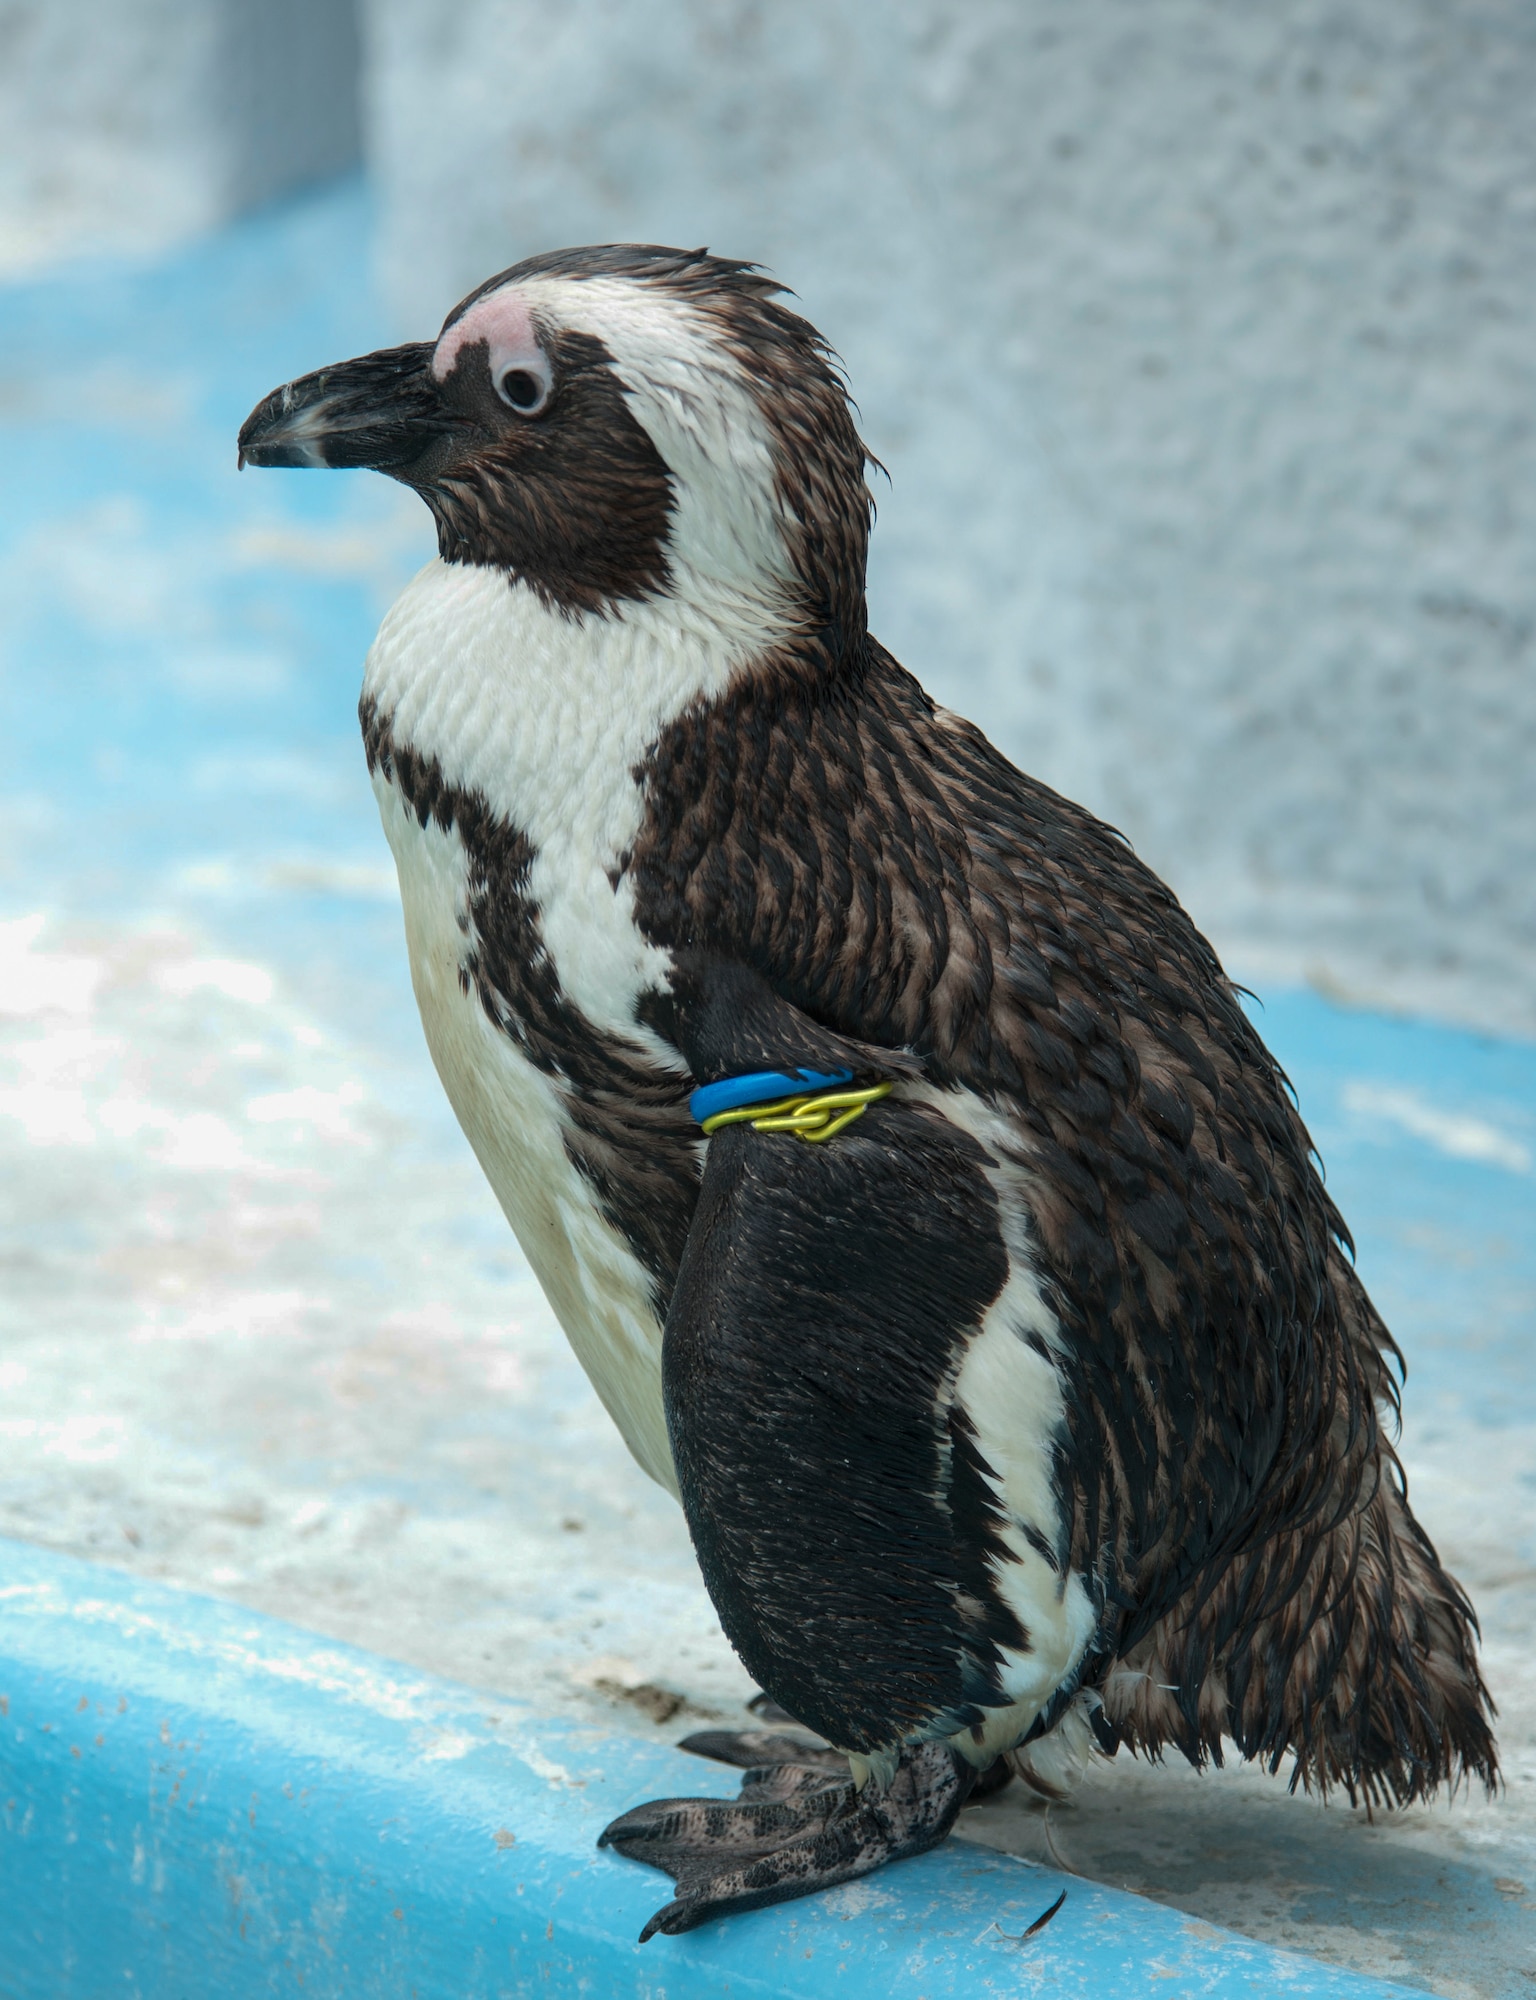 A penguin (Spheniscus demersus) begins to dry off after swimming in the penguin pool at Ueno Zoo Aug. 6, 2013. The largest subspecies of penguin is the Emperor Penguin. Penguins eat only seafood and have to eat their food whole because they don’t have any teeth. (U.S. Air Force photo by Senior Airman Michael Washburn)